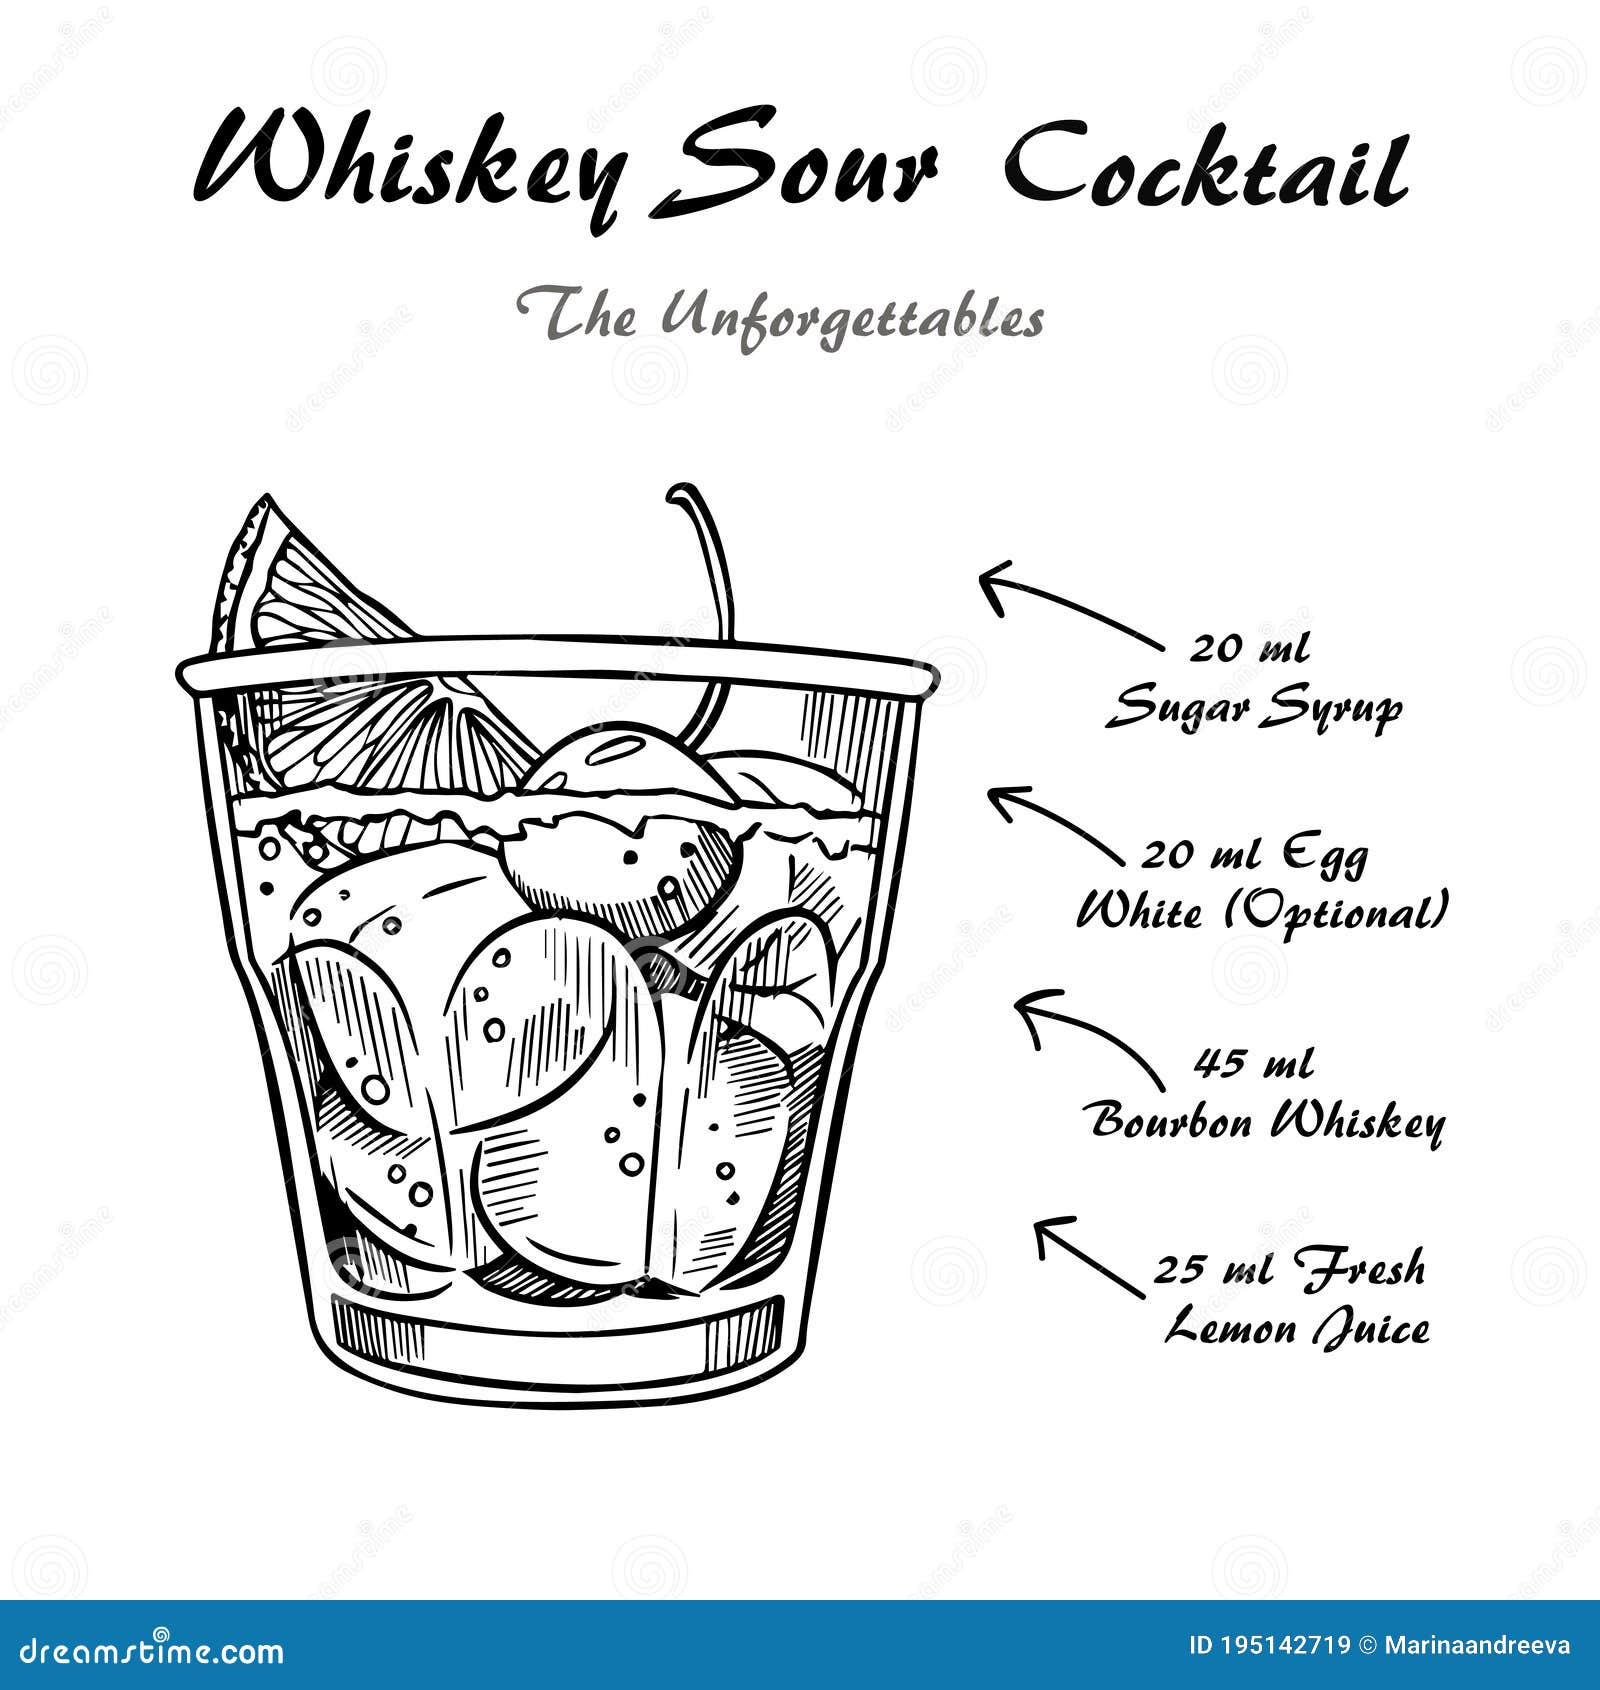 whisky sour recipe without egg white